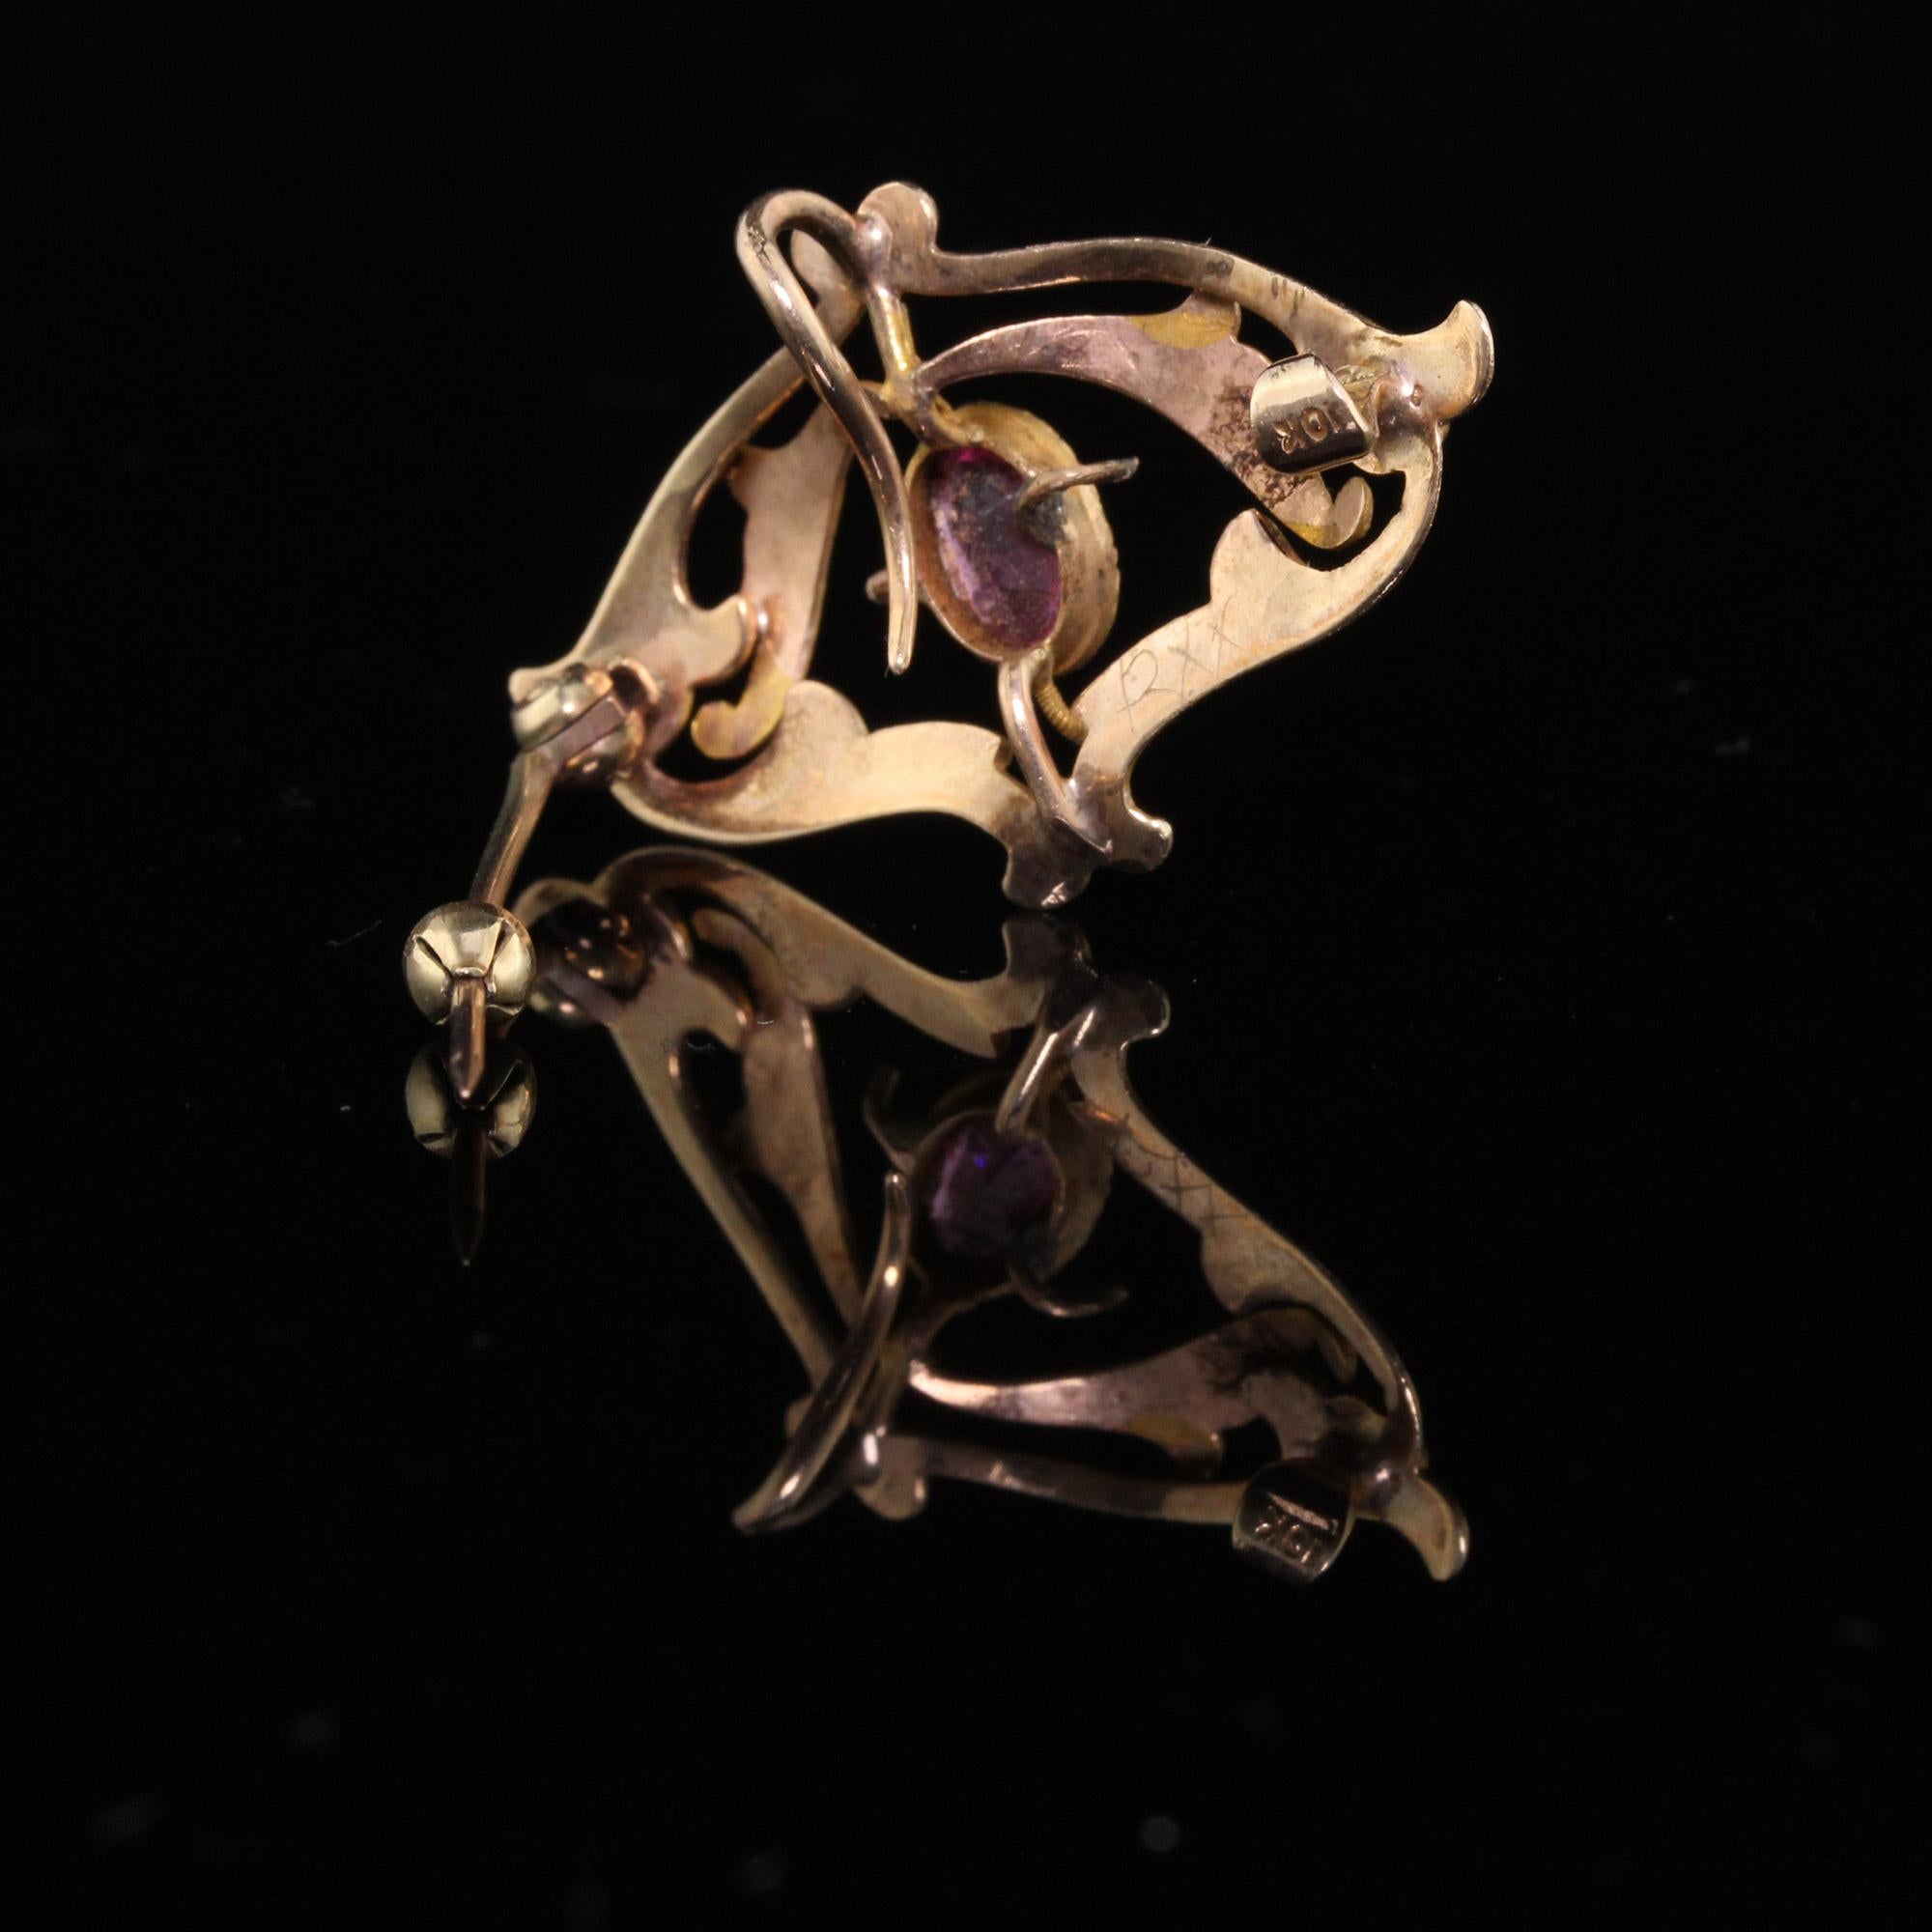 Stunning Art Nouveau gold pin with ruby center & enameling.

Metal: 10K Yellow Gold

Weight: 2.0 Grams

Gemstone Weight: Approximately 0.60 ct ruby

Measurements: 29.64 x 17.89 mm